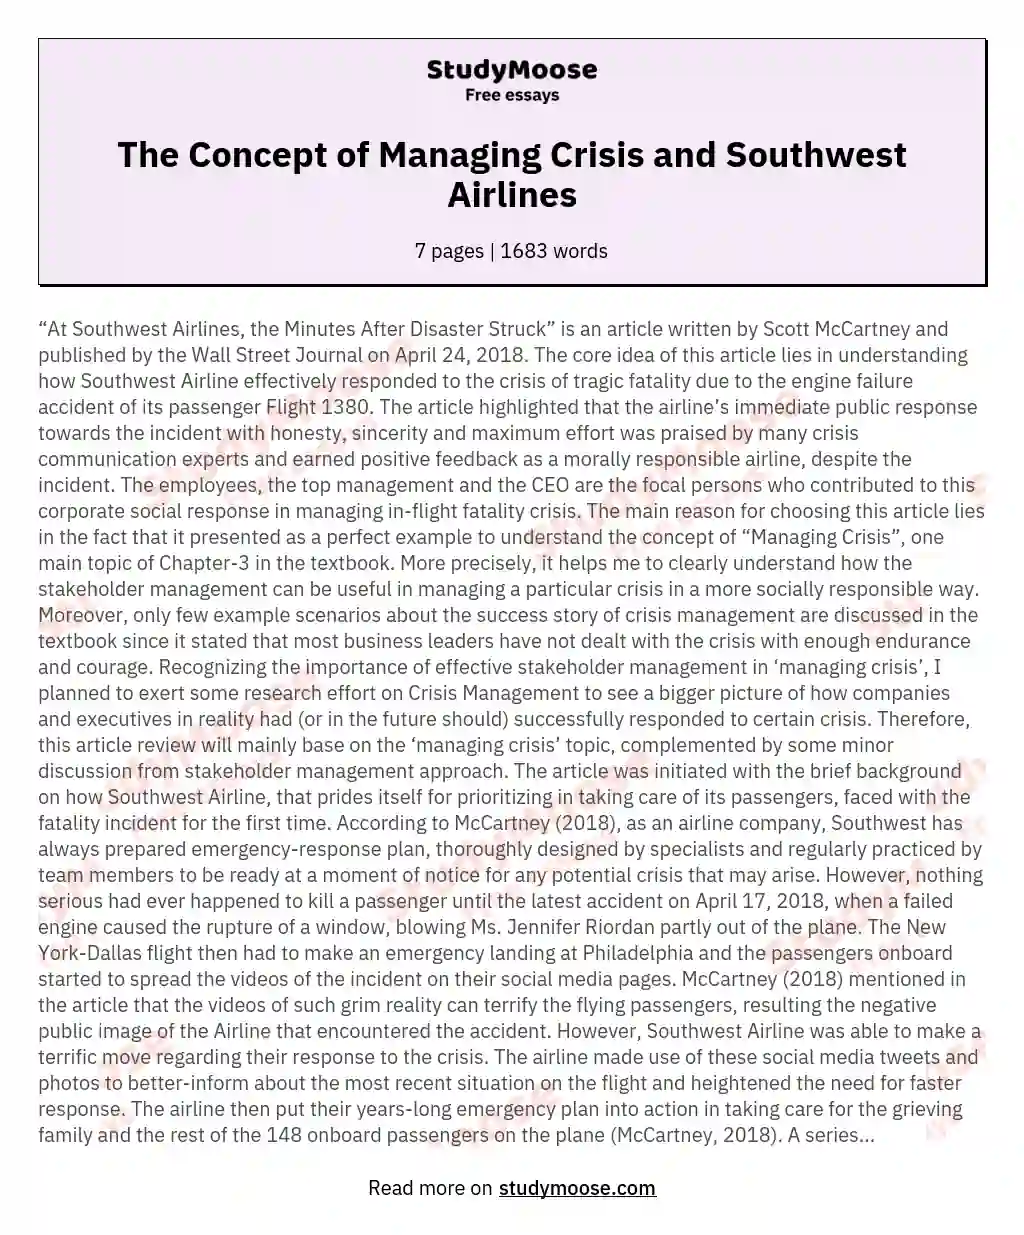 The Concept of Managing Crisis and Southwest Airlines essay